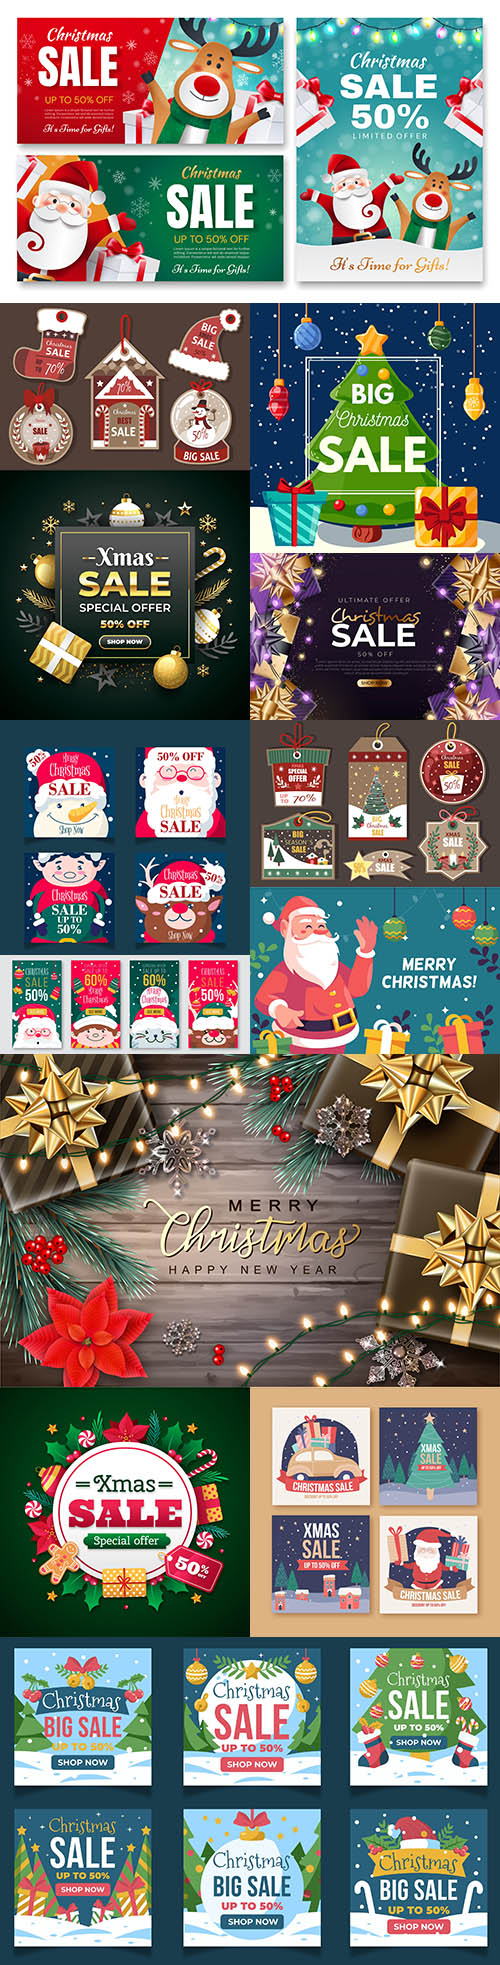 Christmas sale instagram template on social networks
